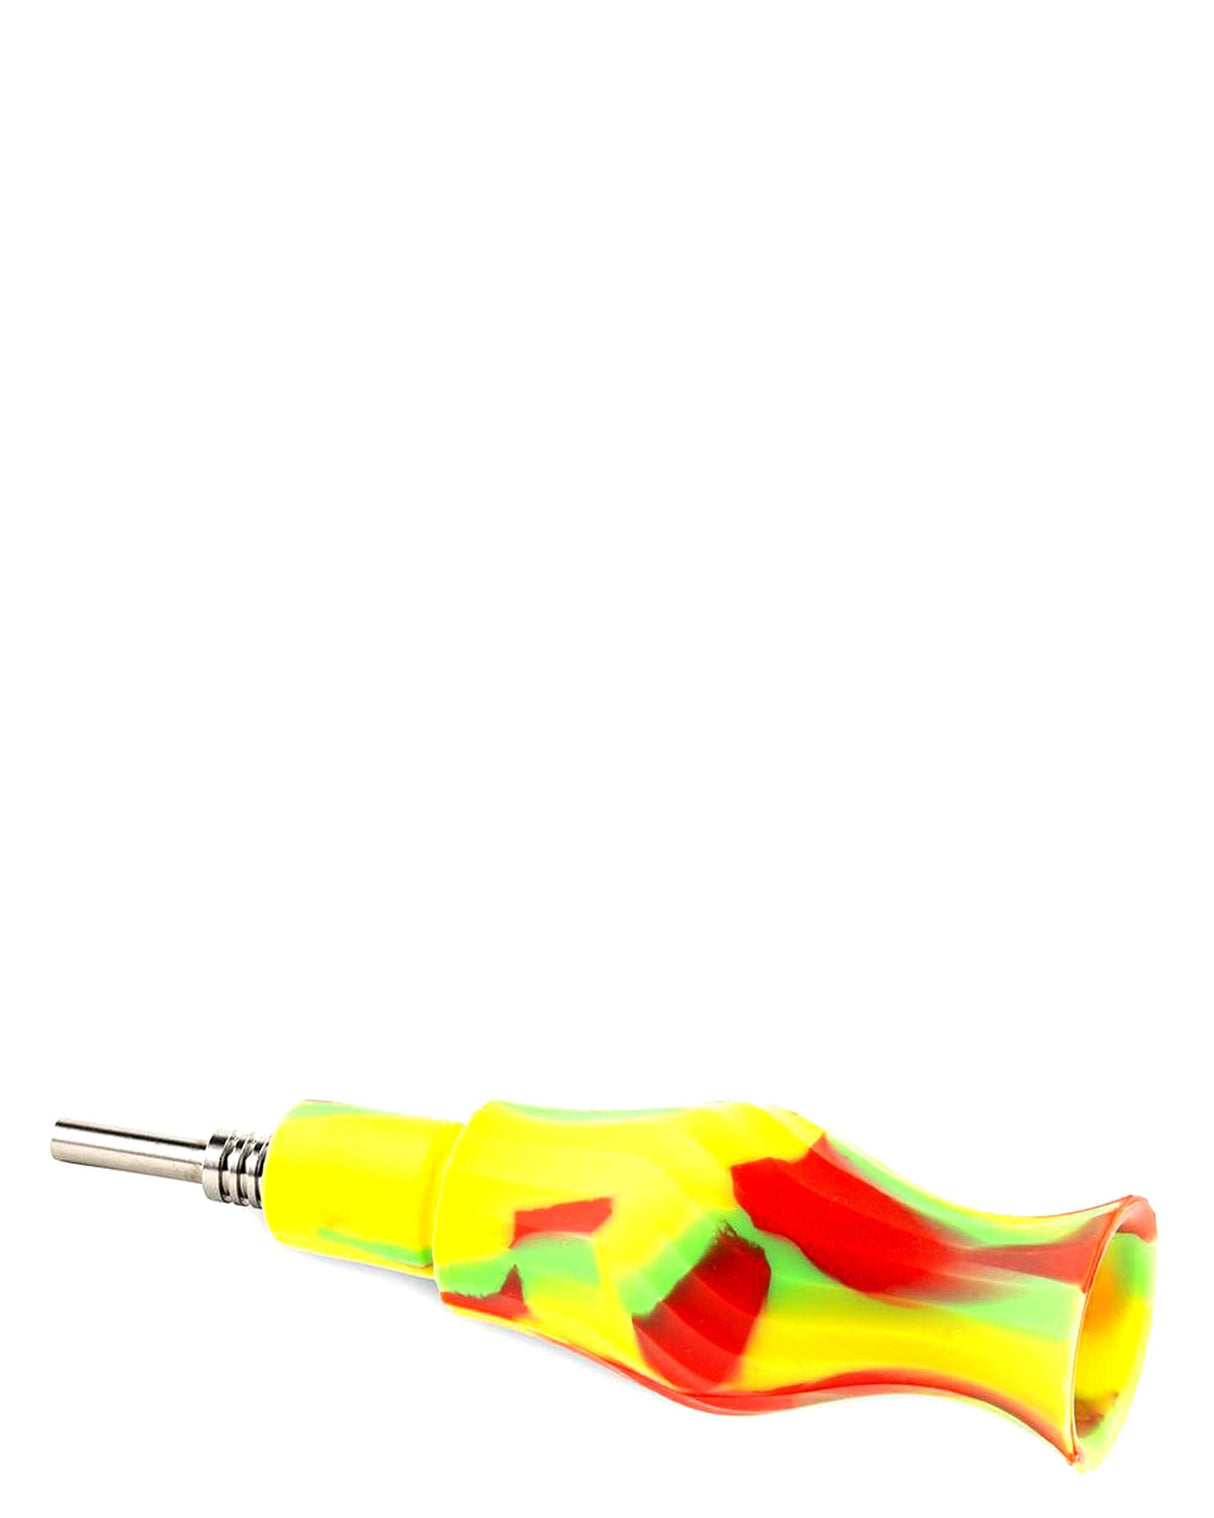 Ooze Clobb 4-in-1 Silicone Pipe in Rasta colors with Quartz Bowl - Side View